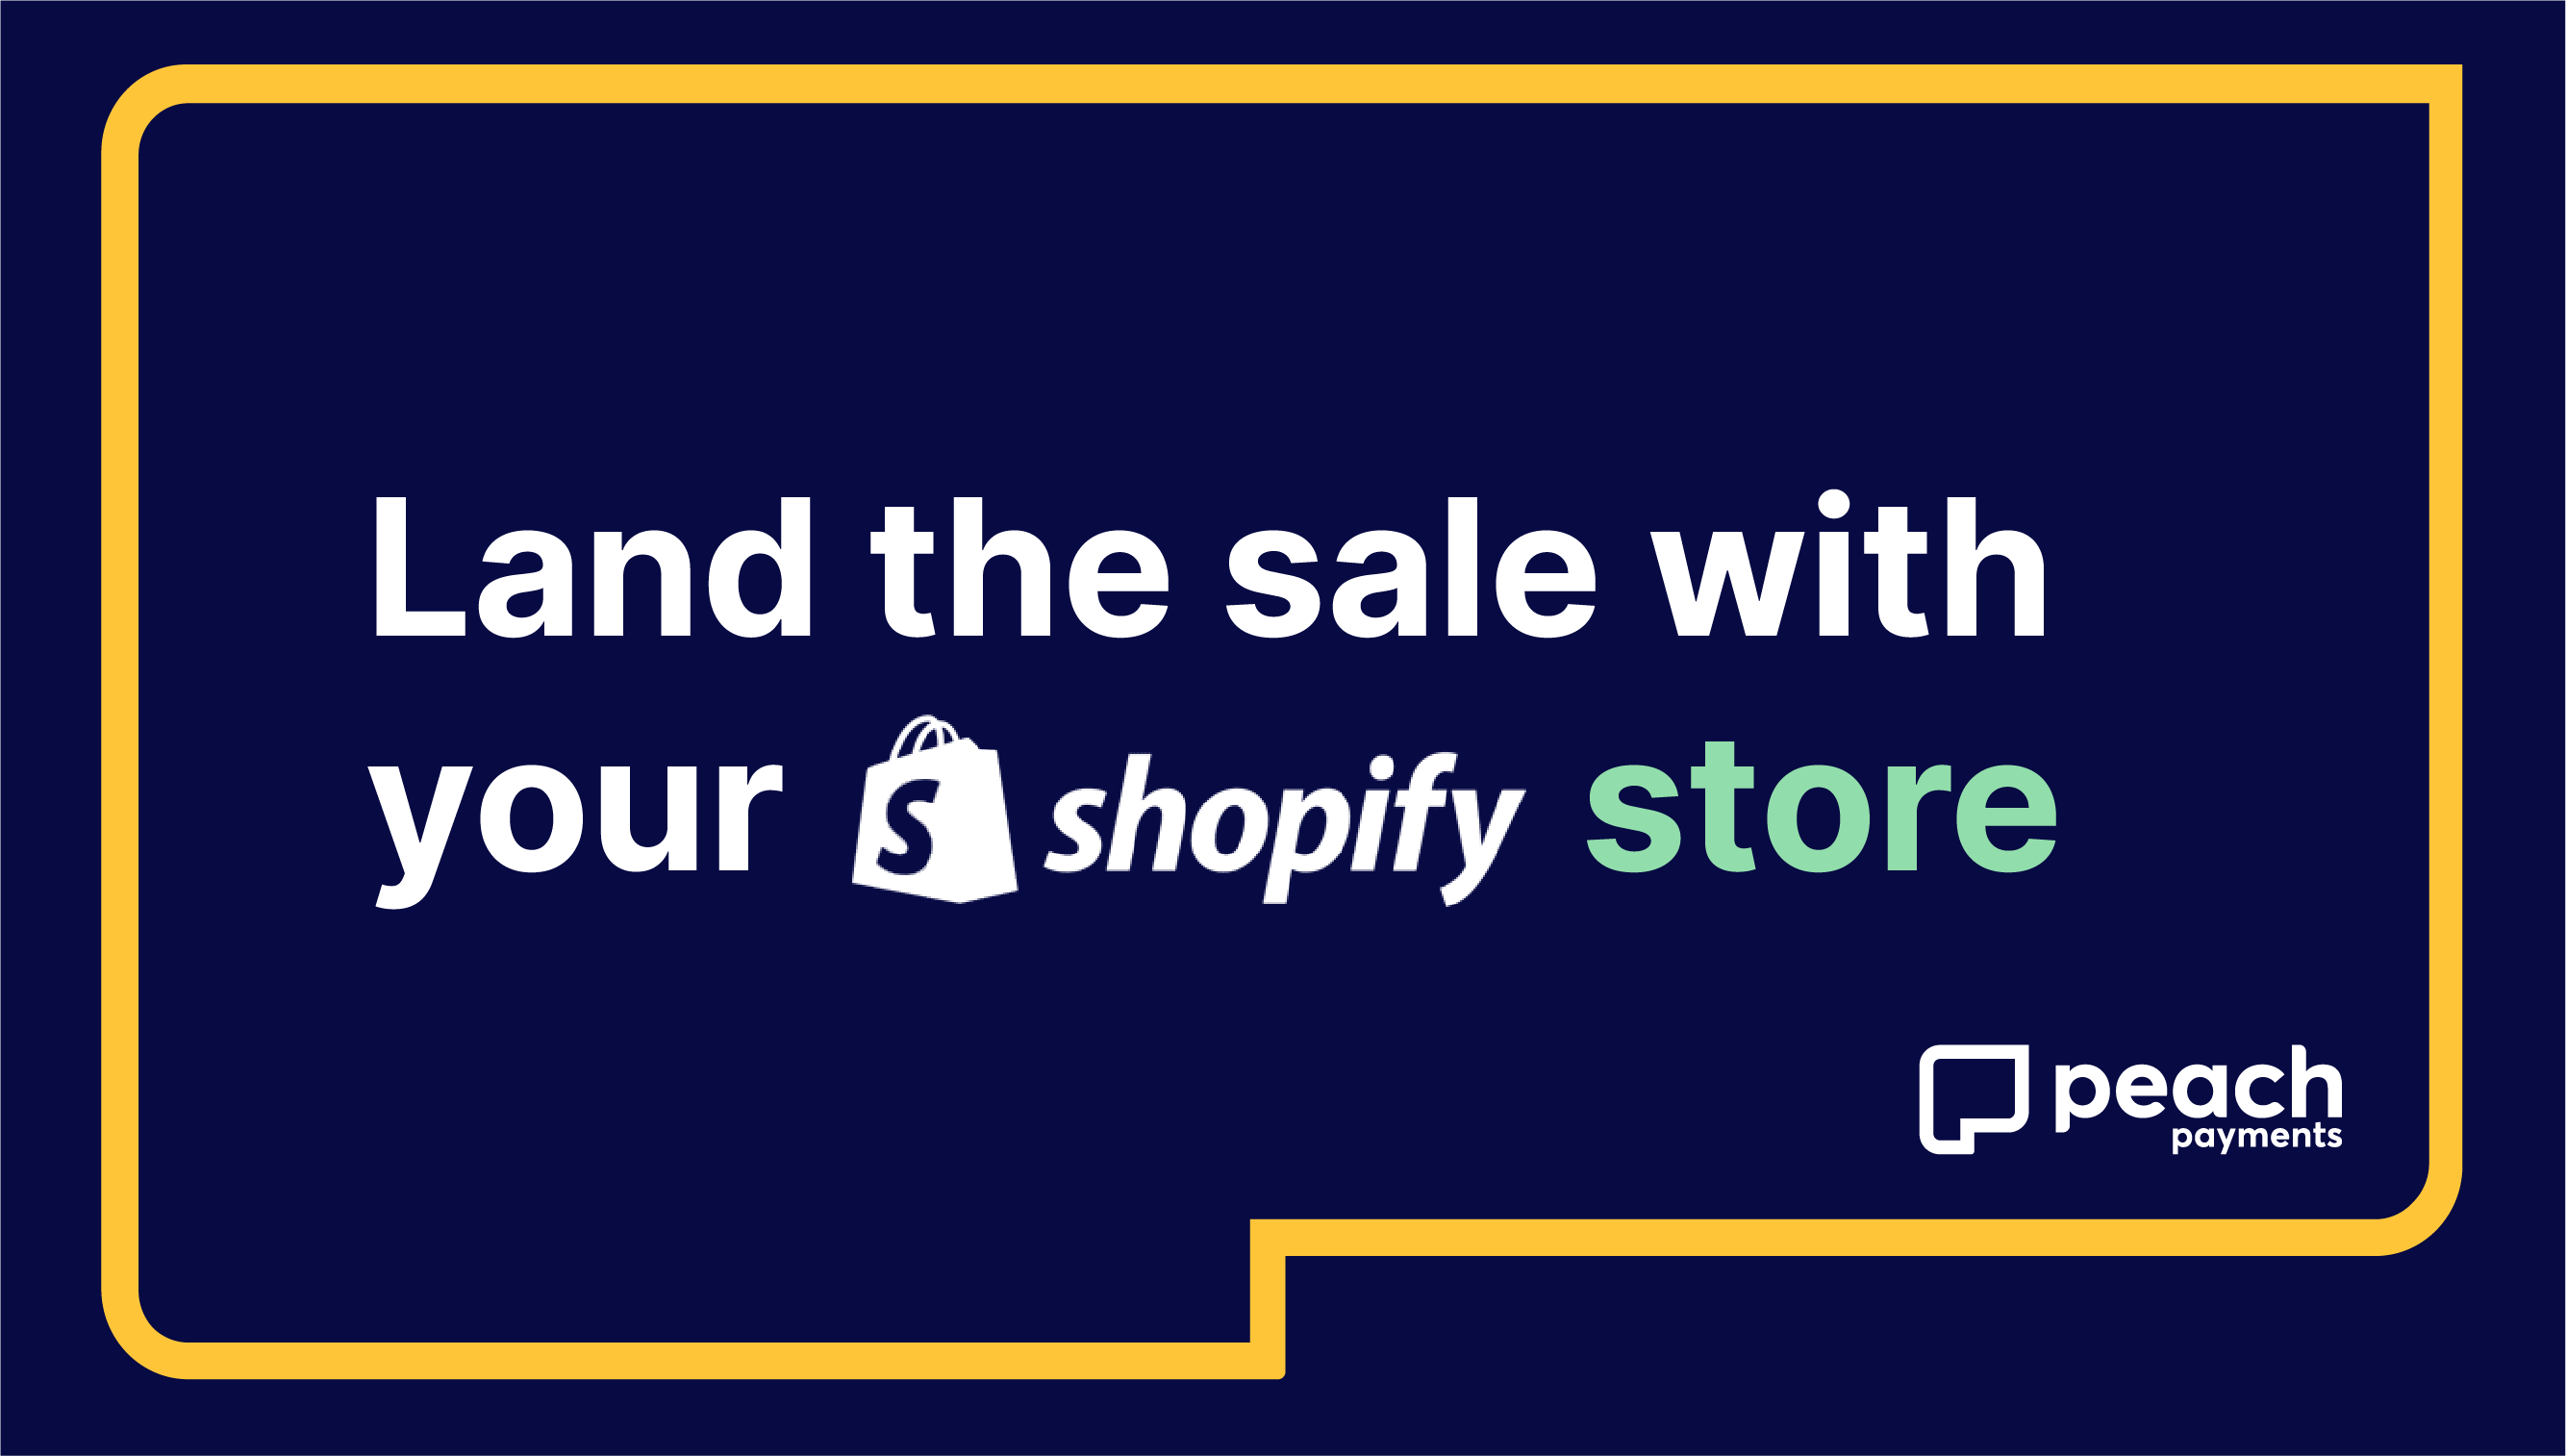 Land the sale with your Shopify store